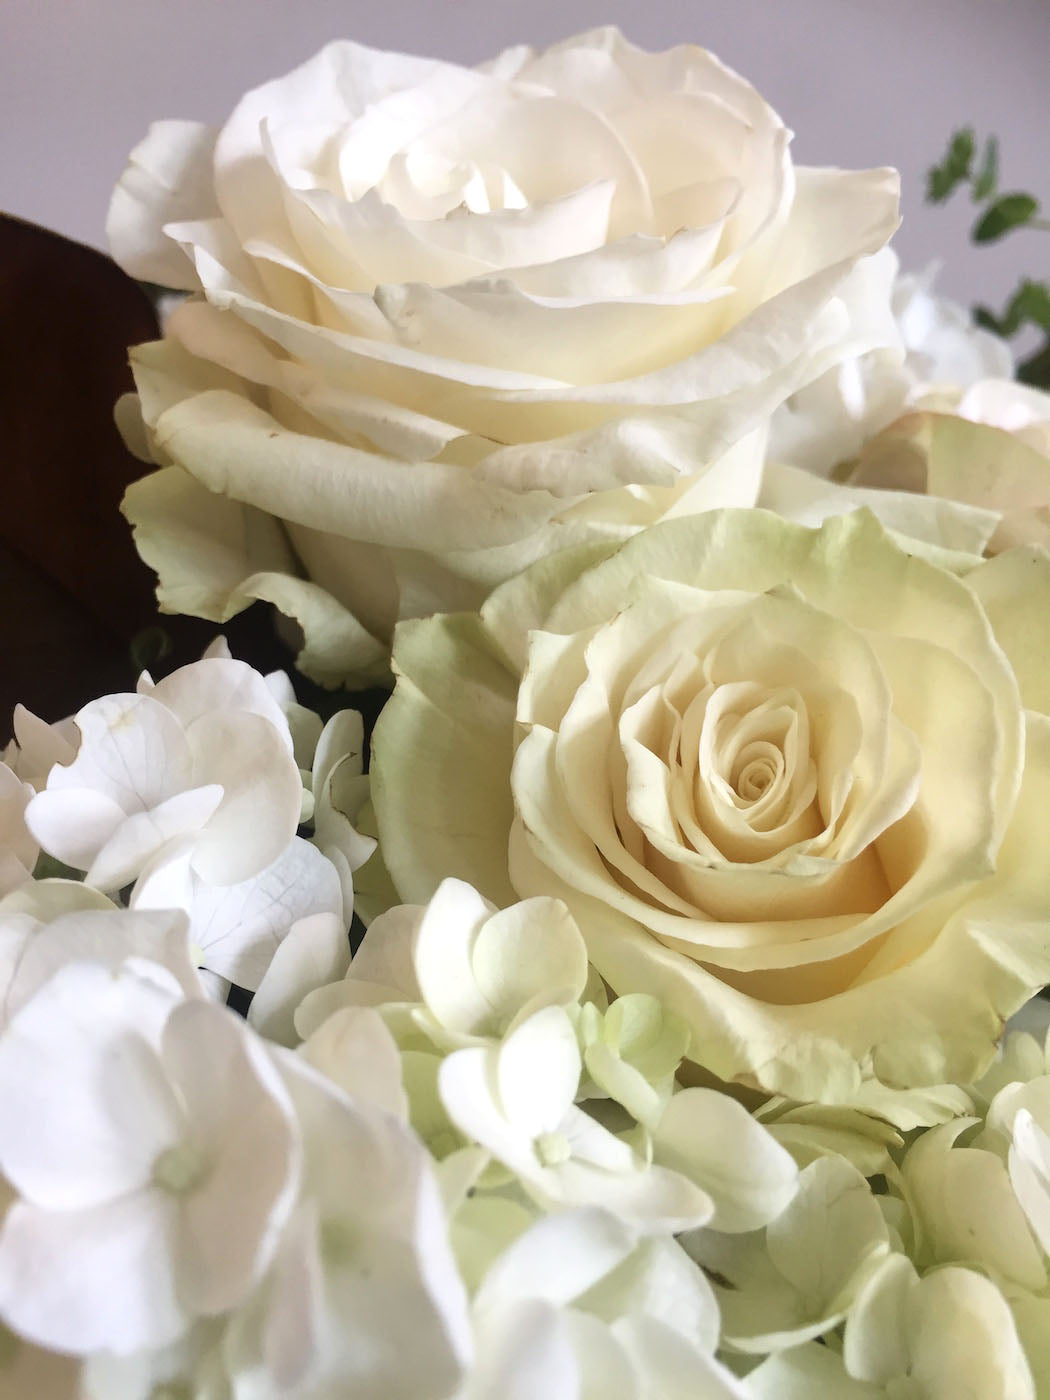 A closeup shot of white roses and white hydrangea flowers